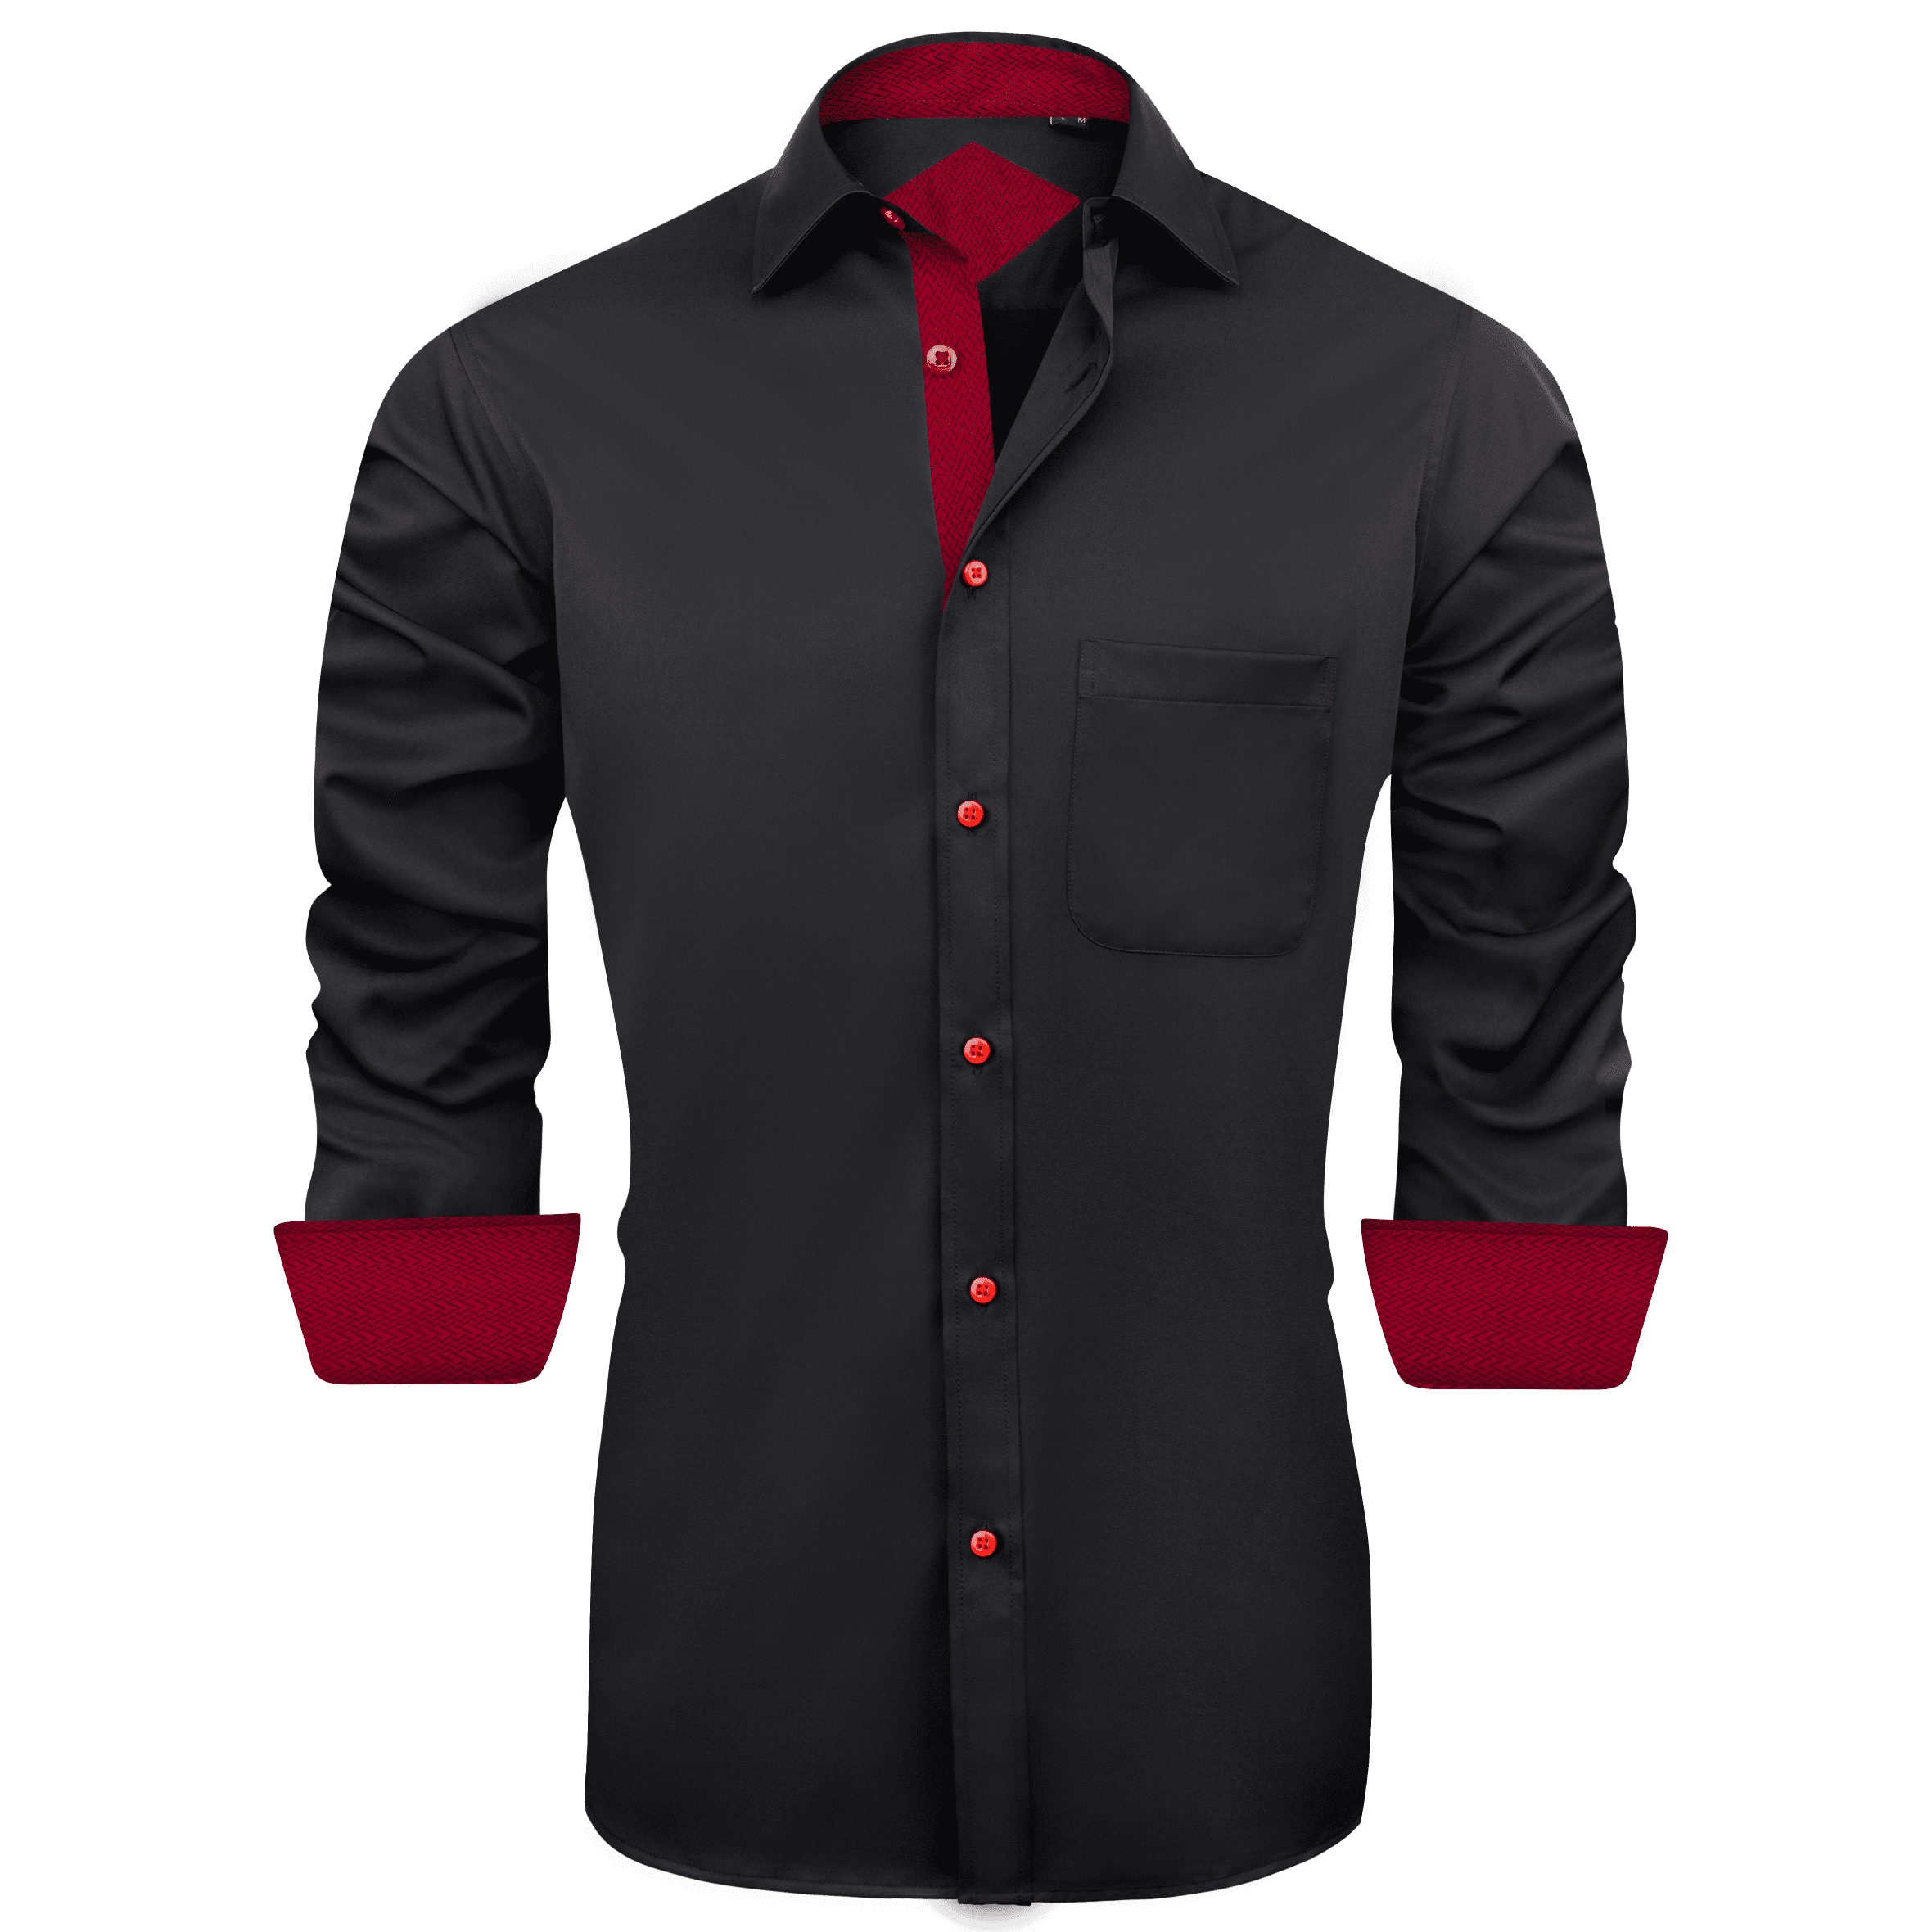 Buy Casual Shirts For Men Online